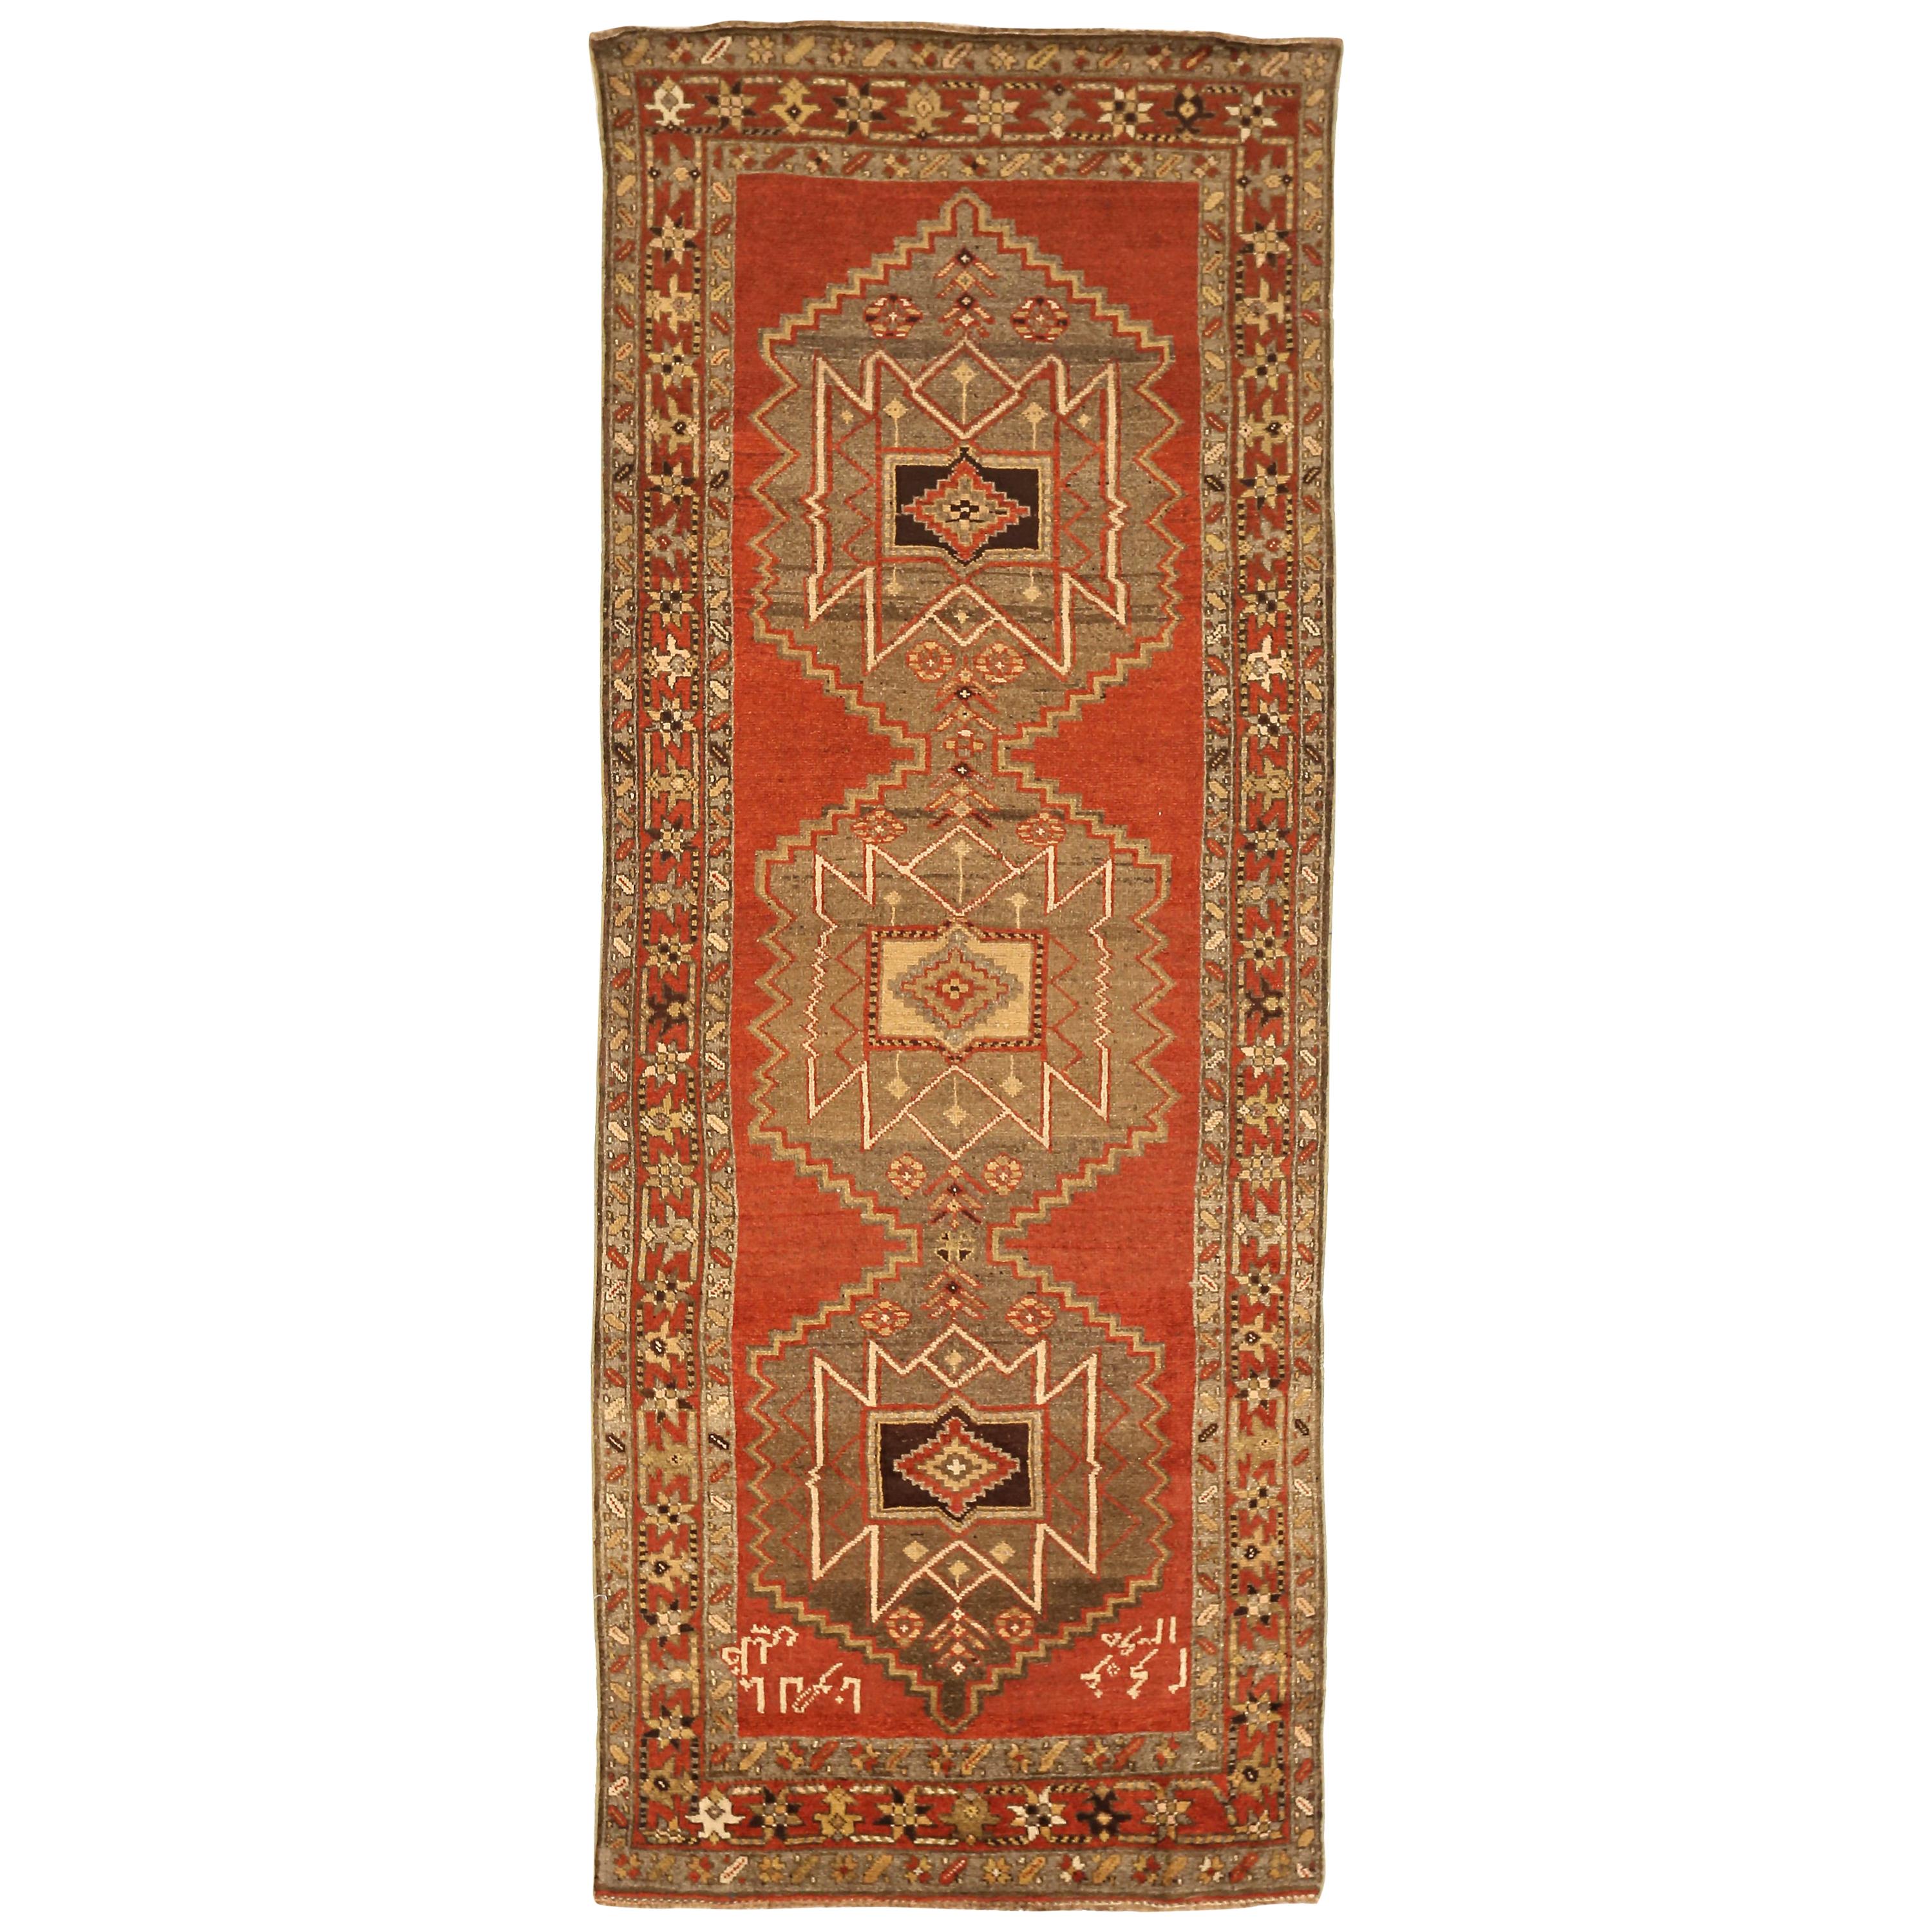 Antique Persian Azerbaijan Area Rug with Tribal Design on Red Field